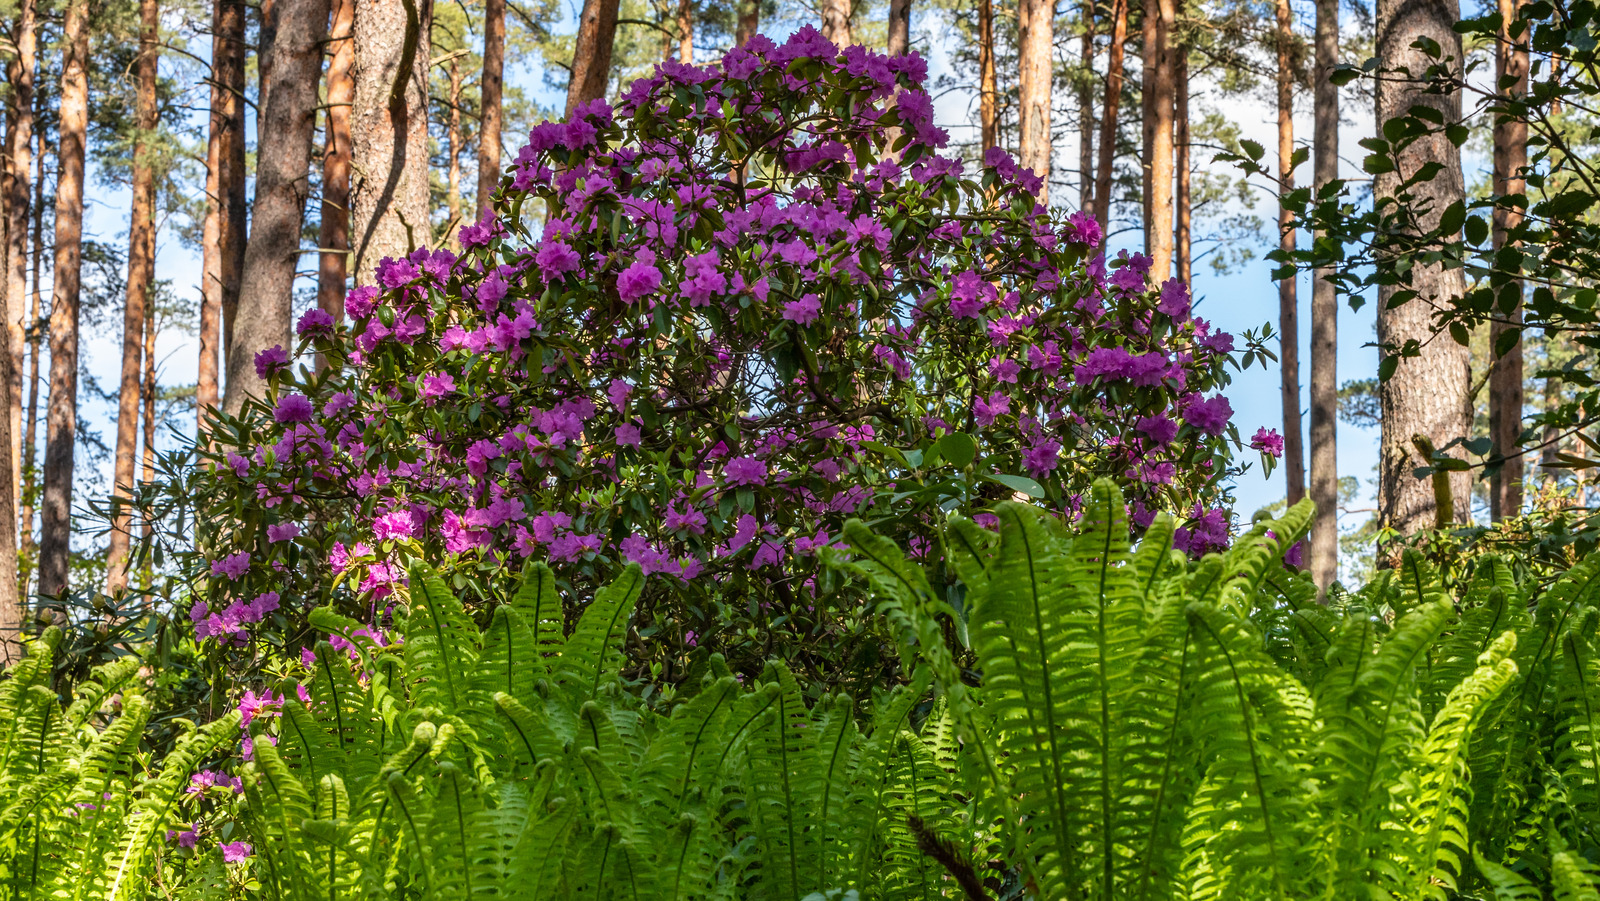 20+ Plants for Under Pine Trees: It Doesn't Have to be a Struggle!